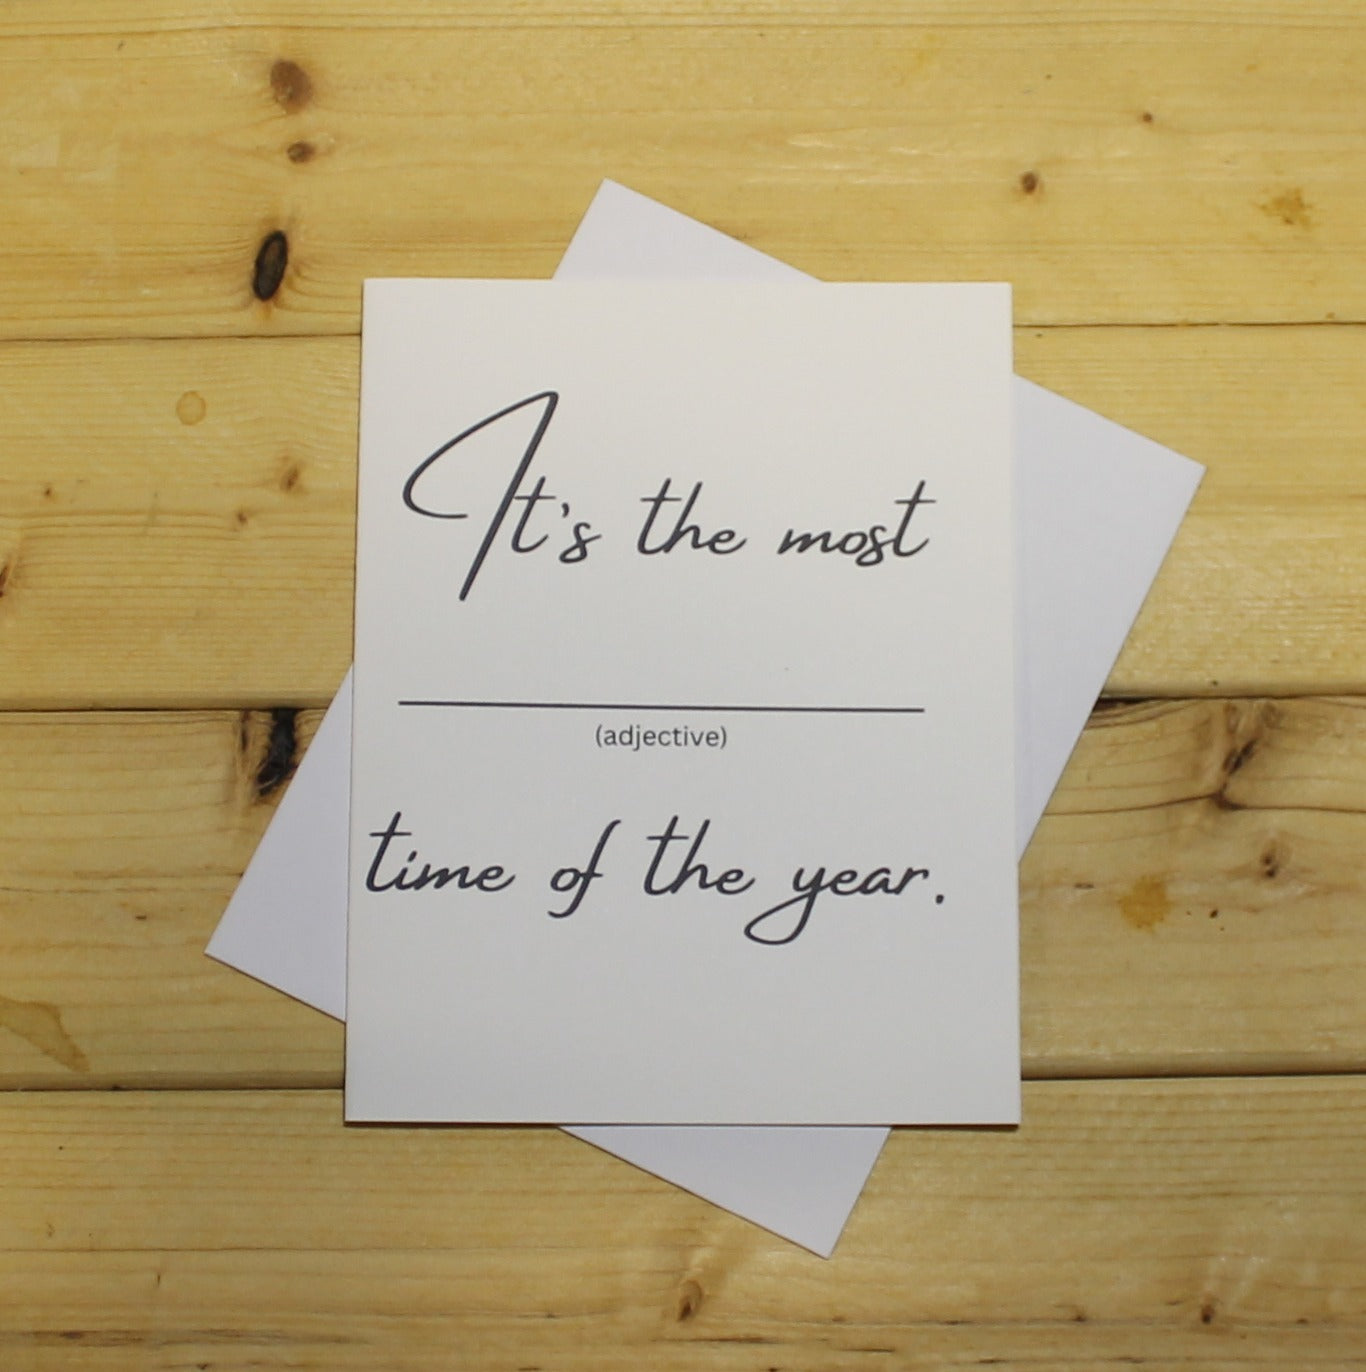 Funny Holiday Card: "It's the most ____ time of the year."